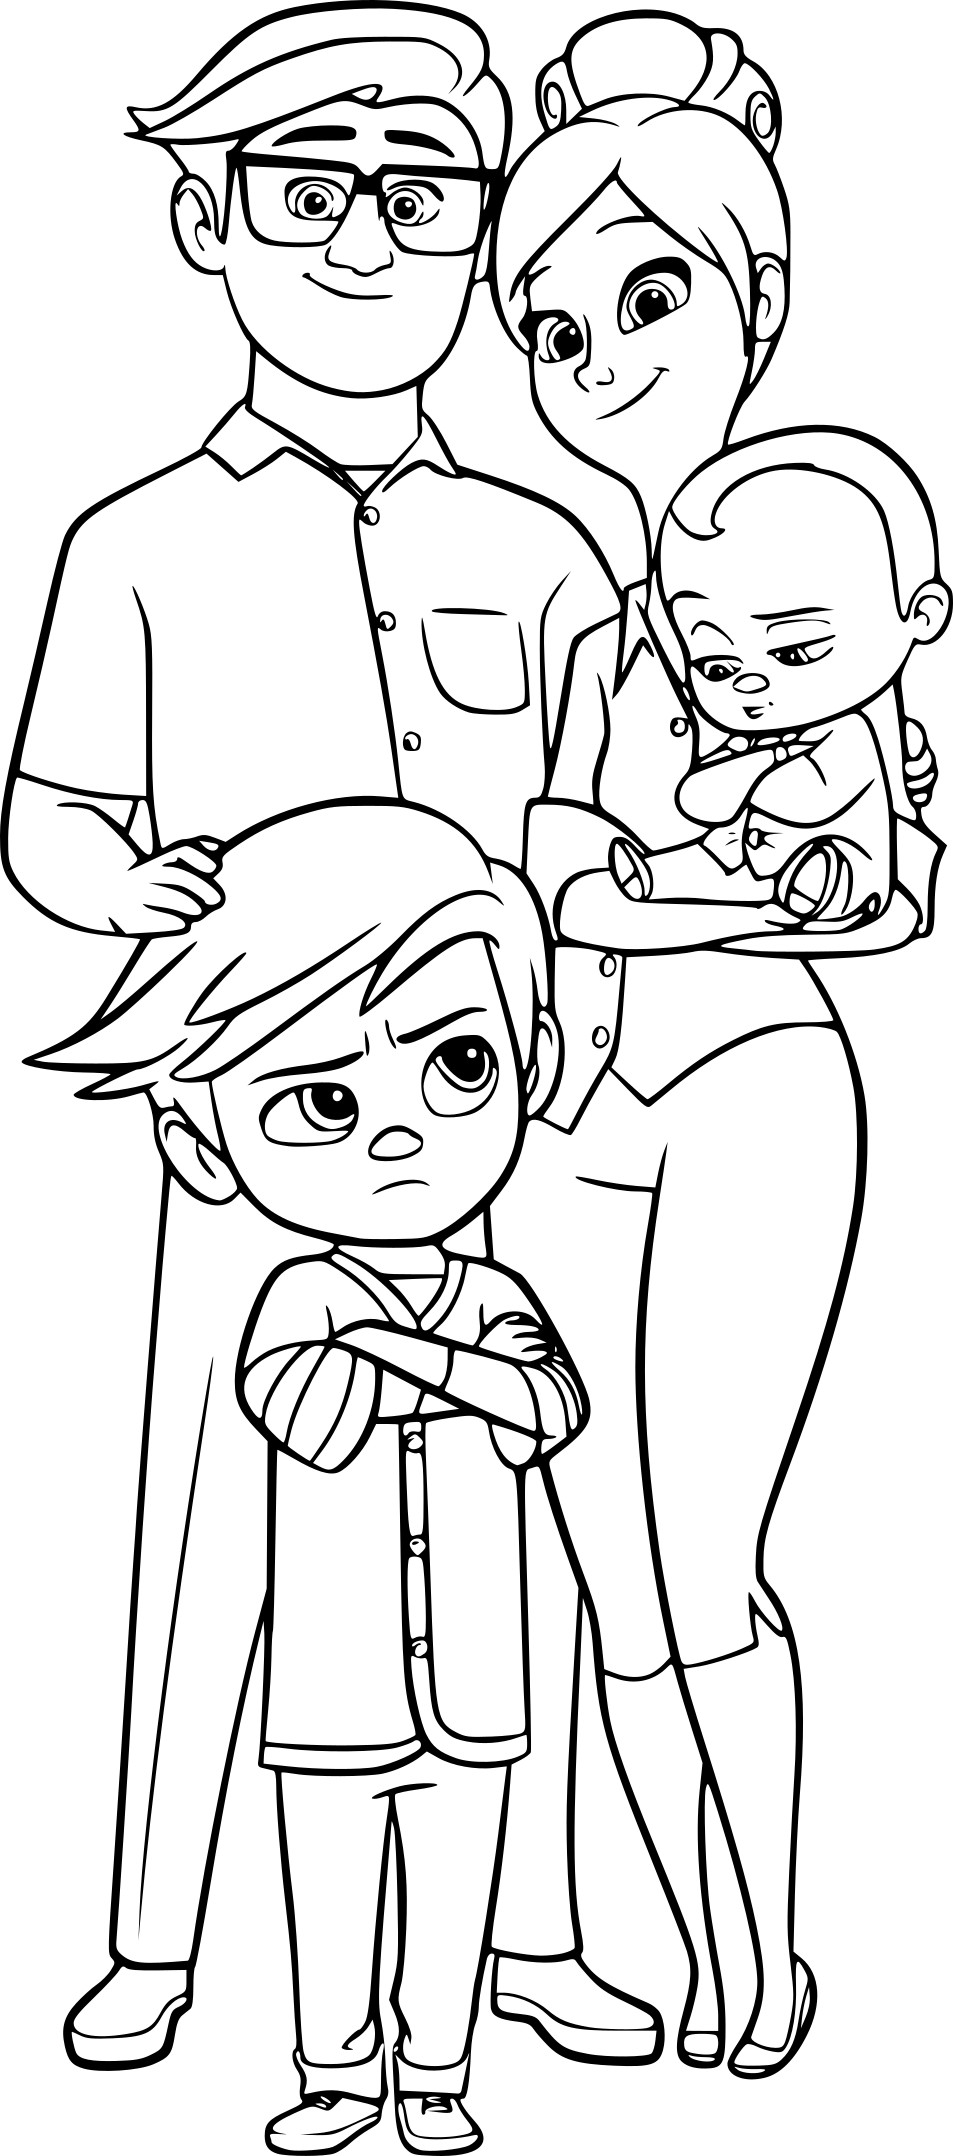 Baby Boss The Family coloring page